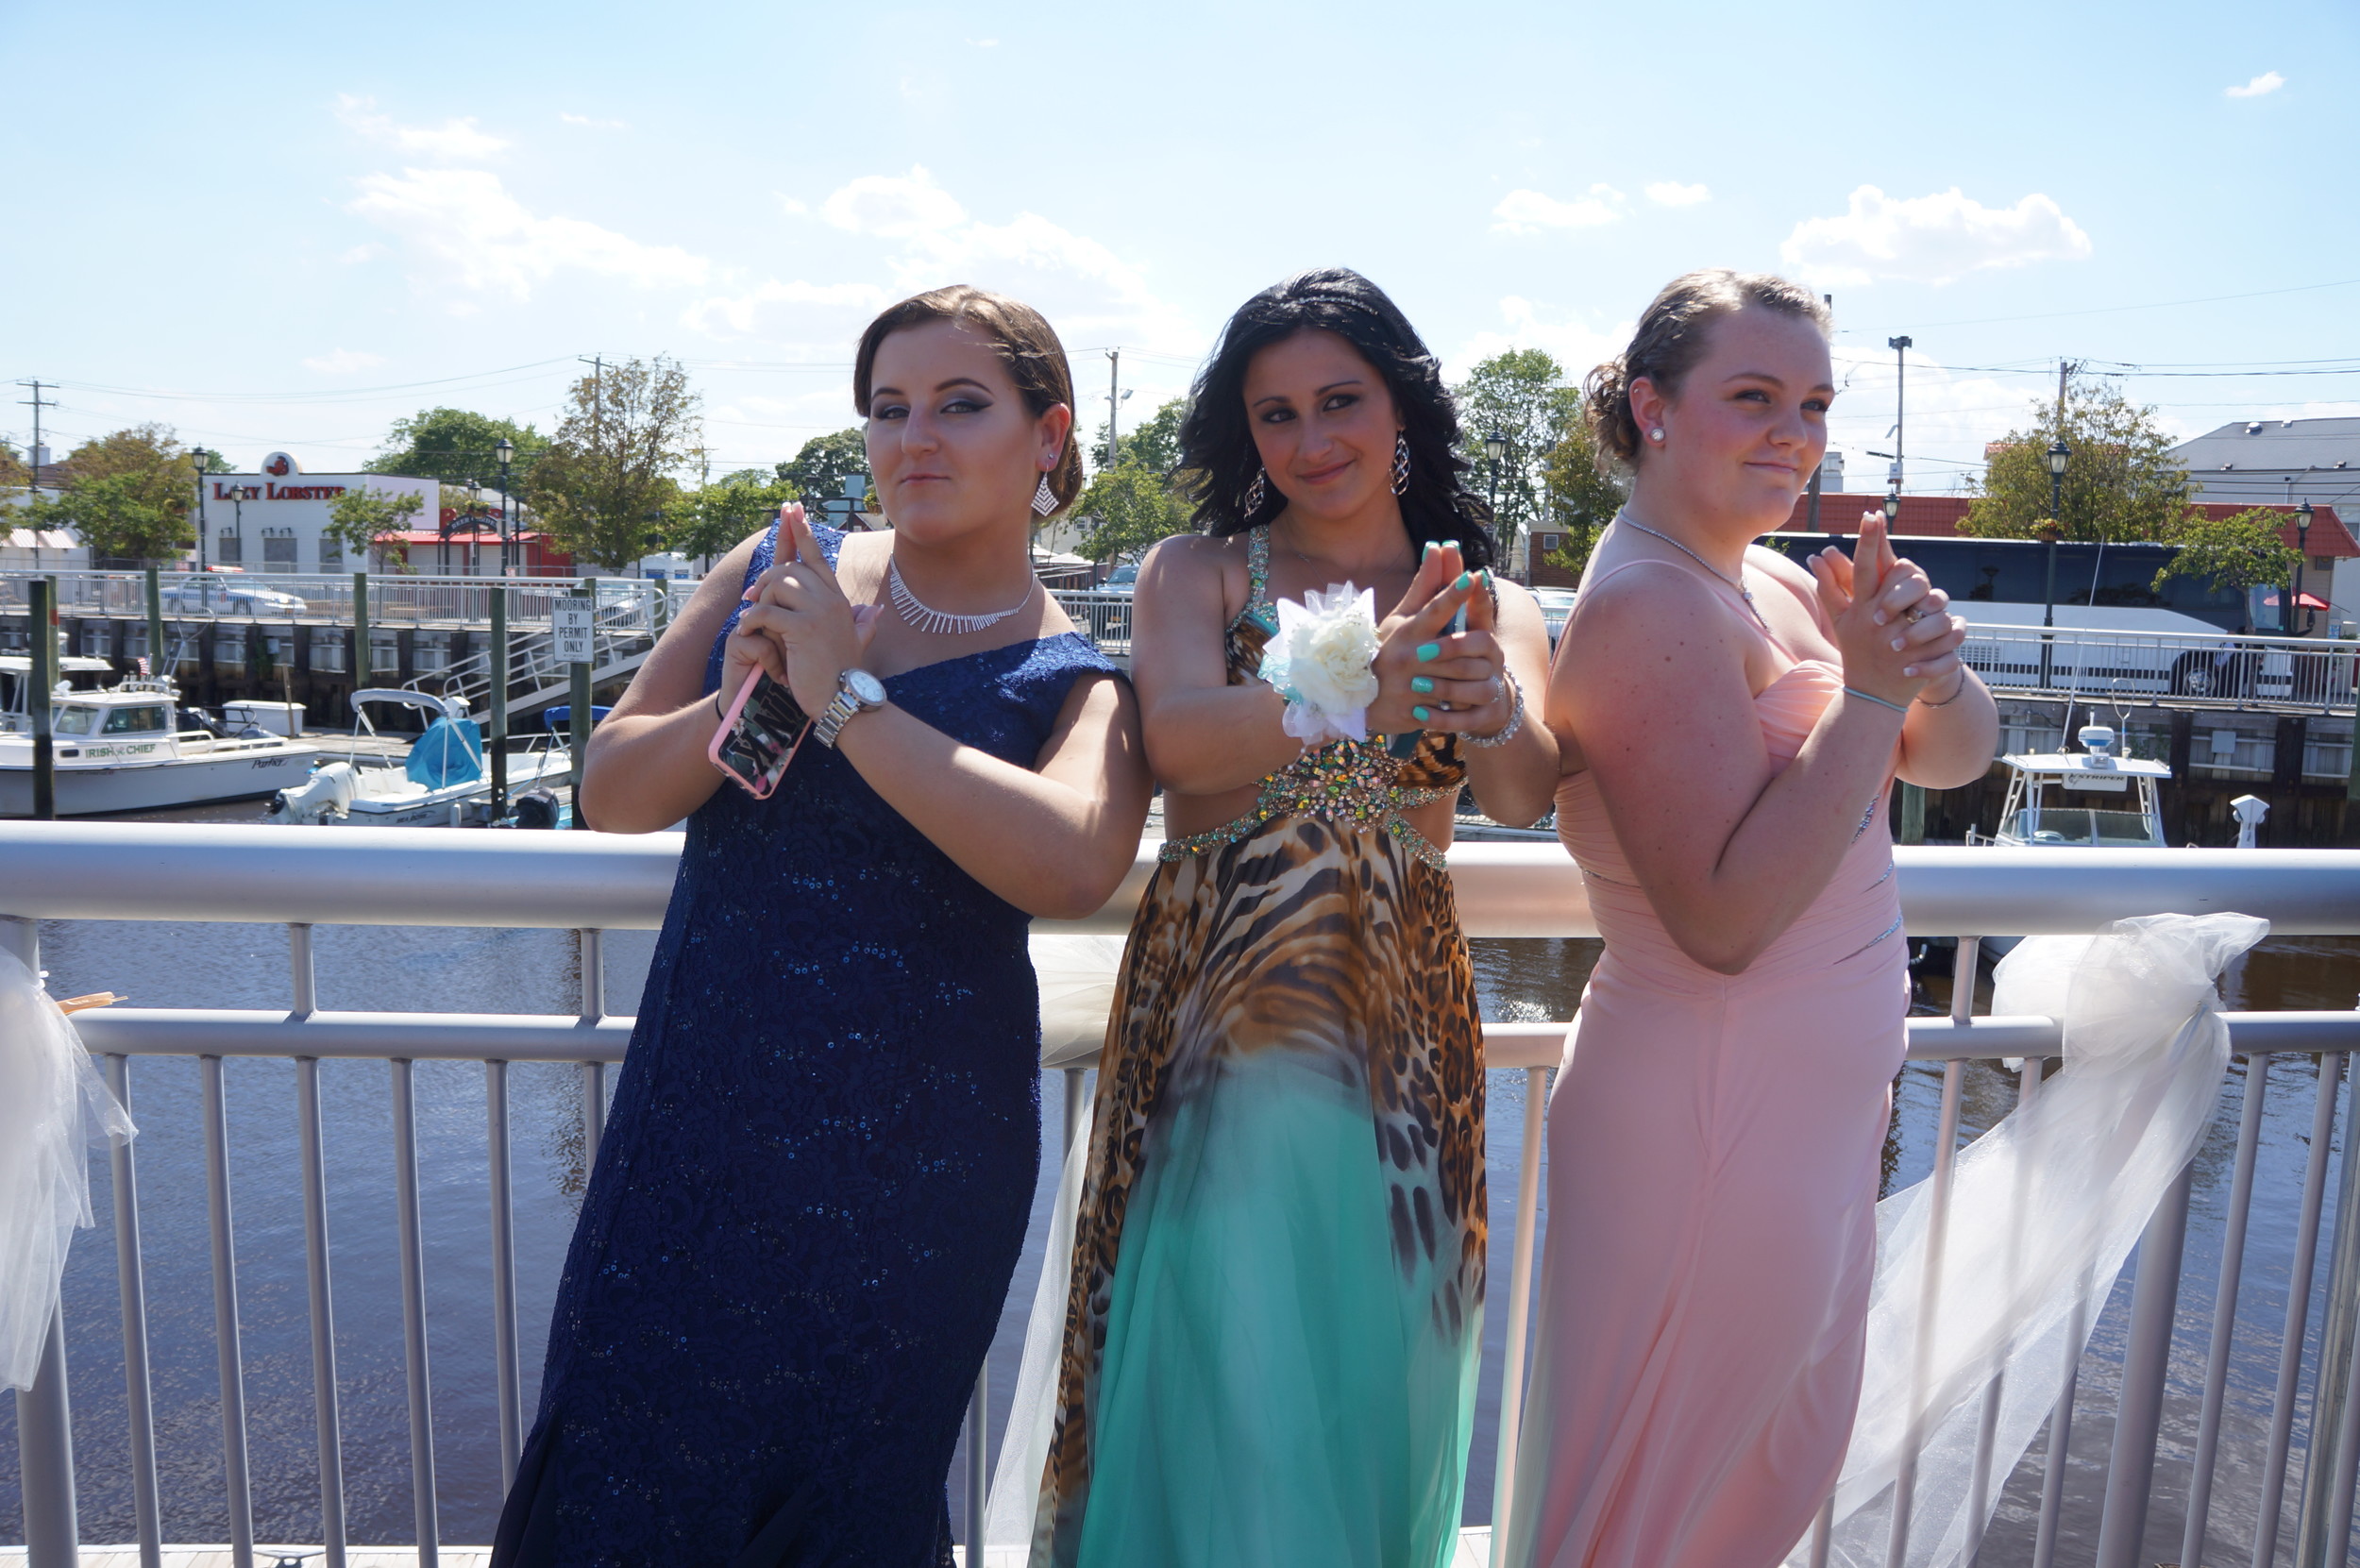 Brittany Dantona, Brianna Ritter and Erin Woehling struck a “Charlie’s Angels” pose before leaving for the prom.